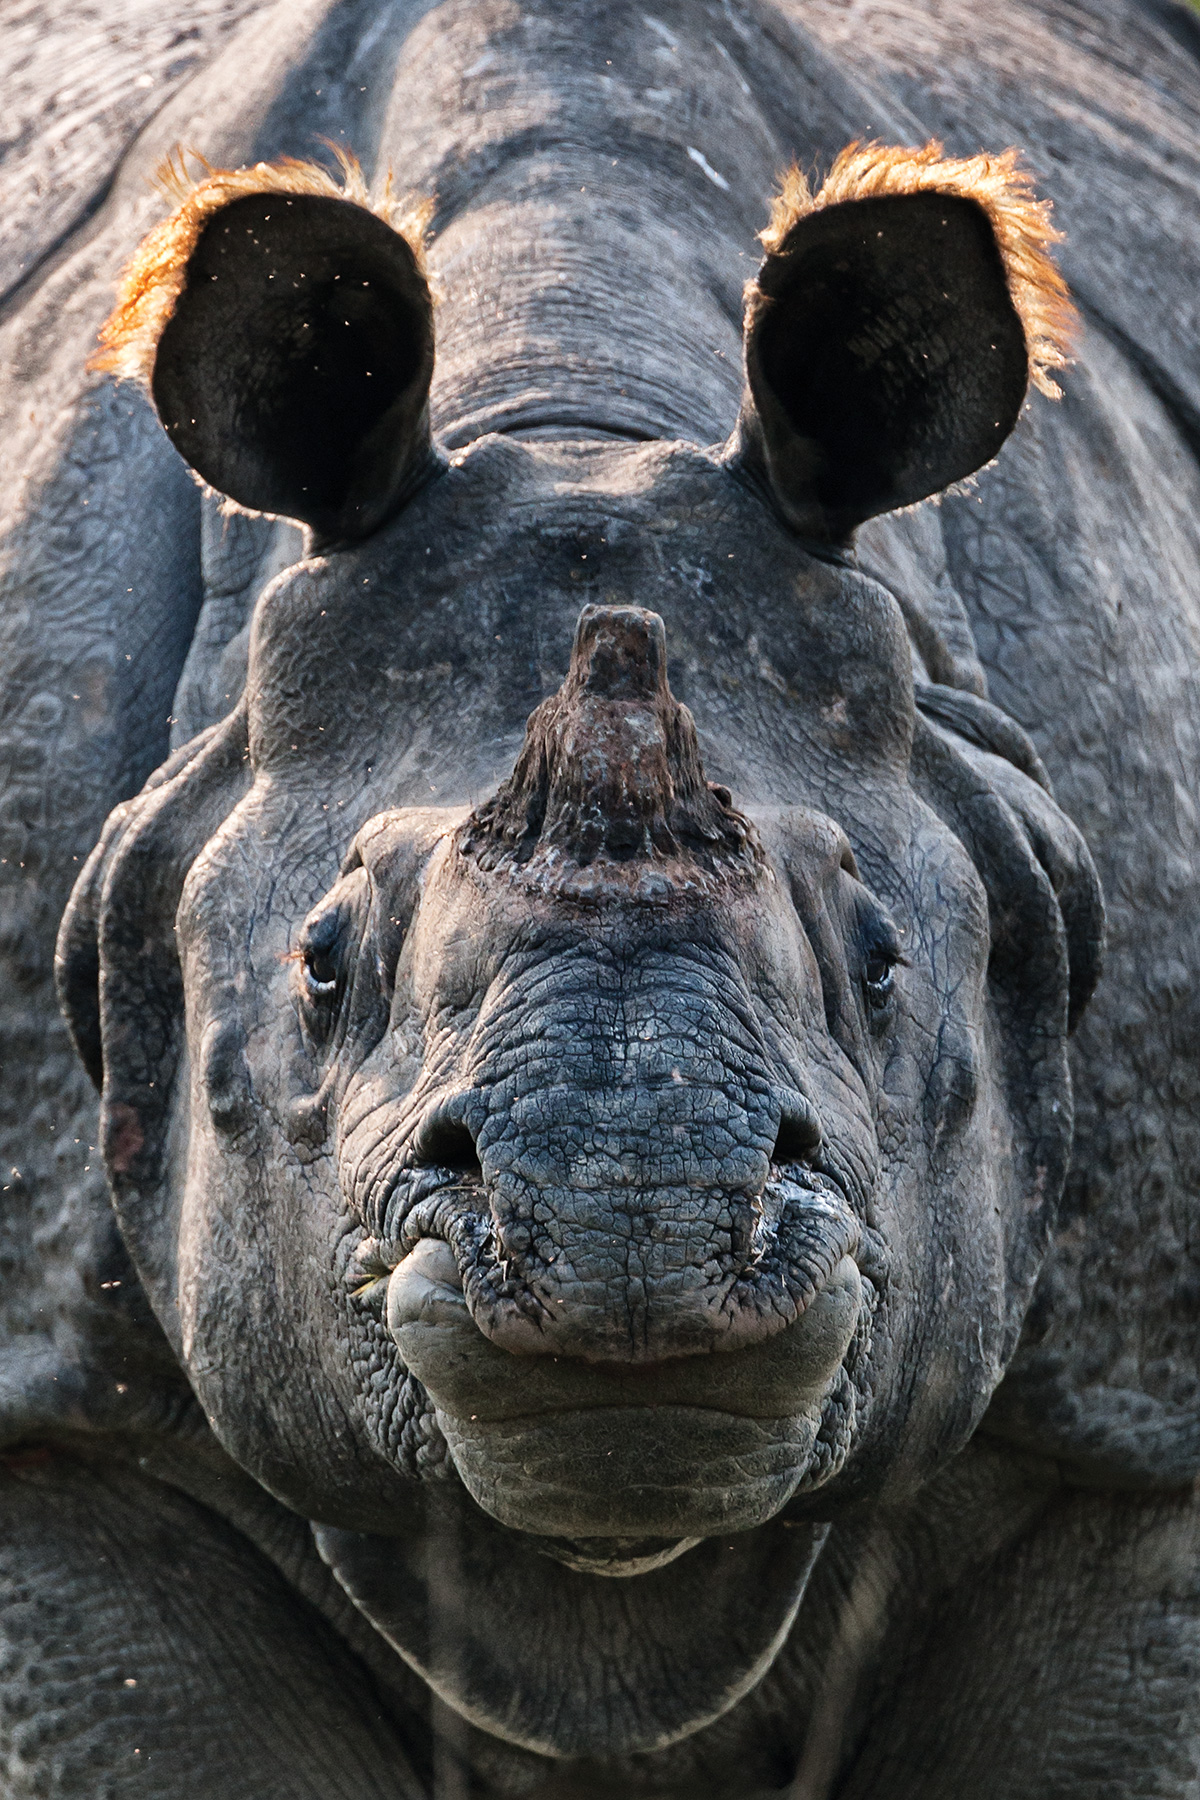 Frontal view of a rhino